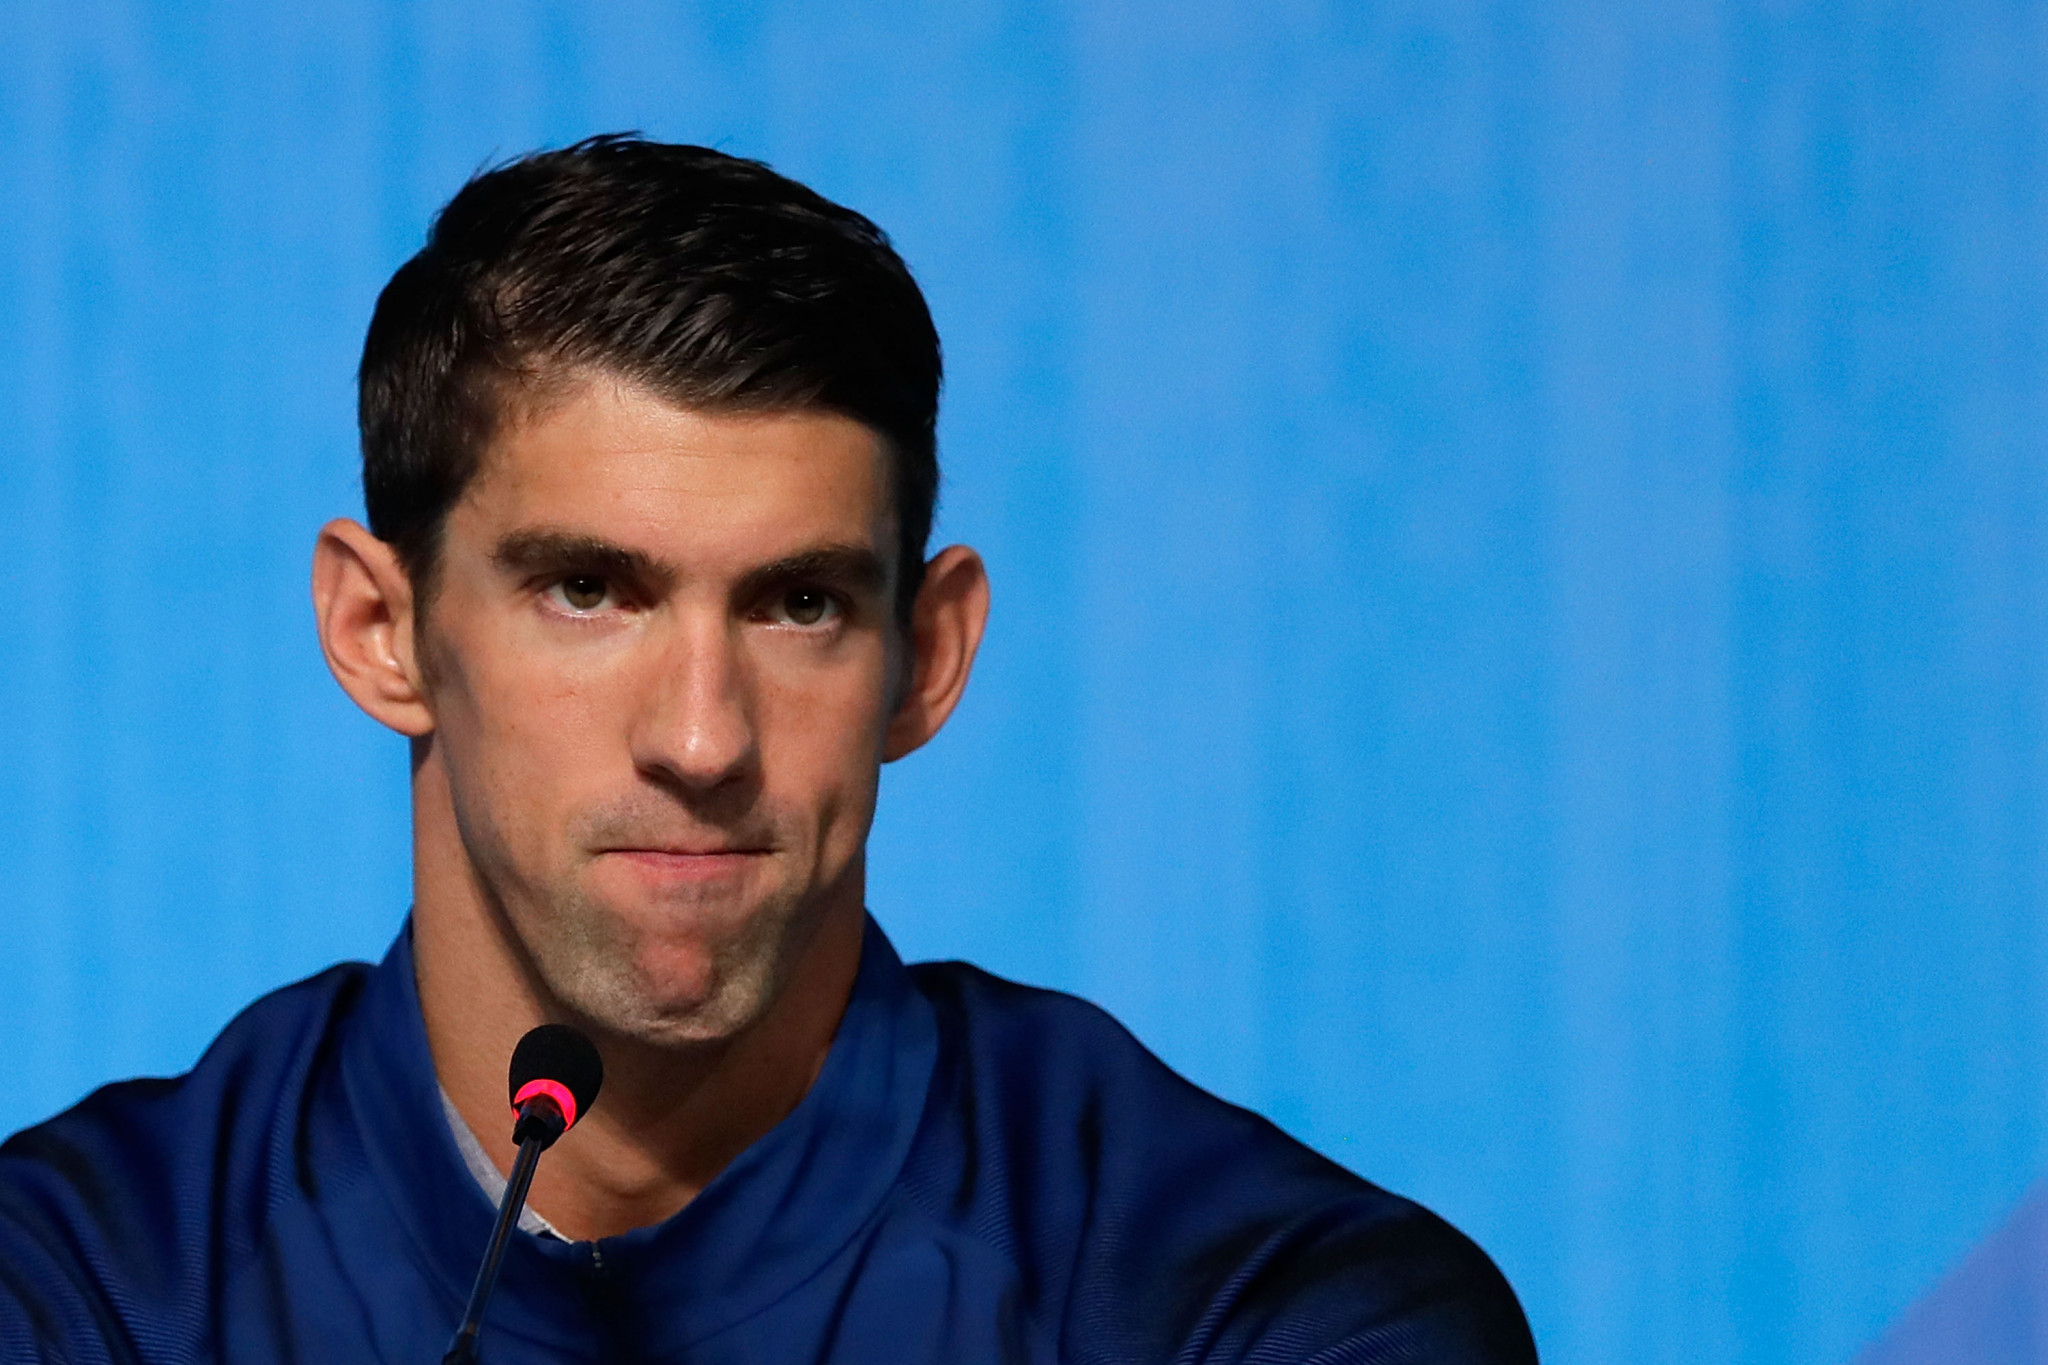 Michael Phelps revealed he is doubtful of a "clean field" at Tokyo 2020 ©Getty Images